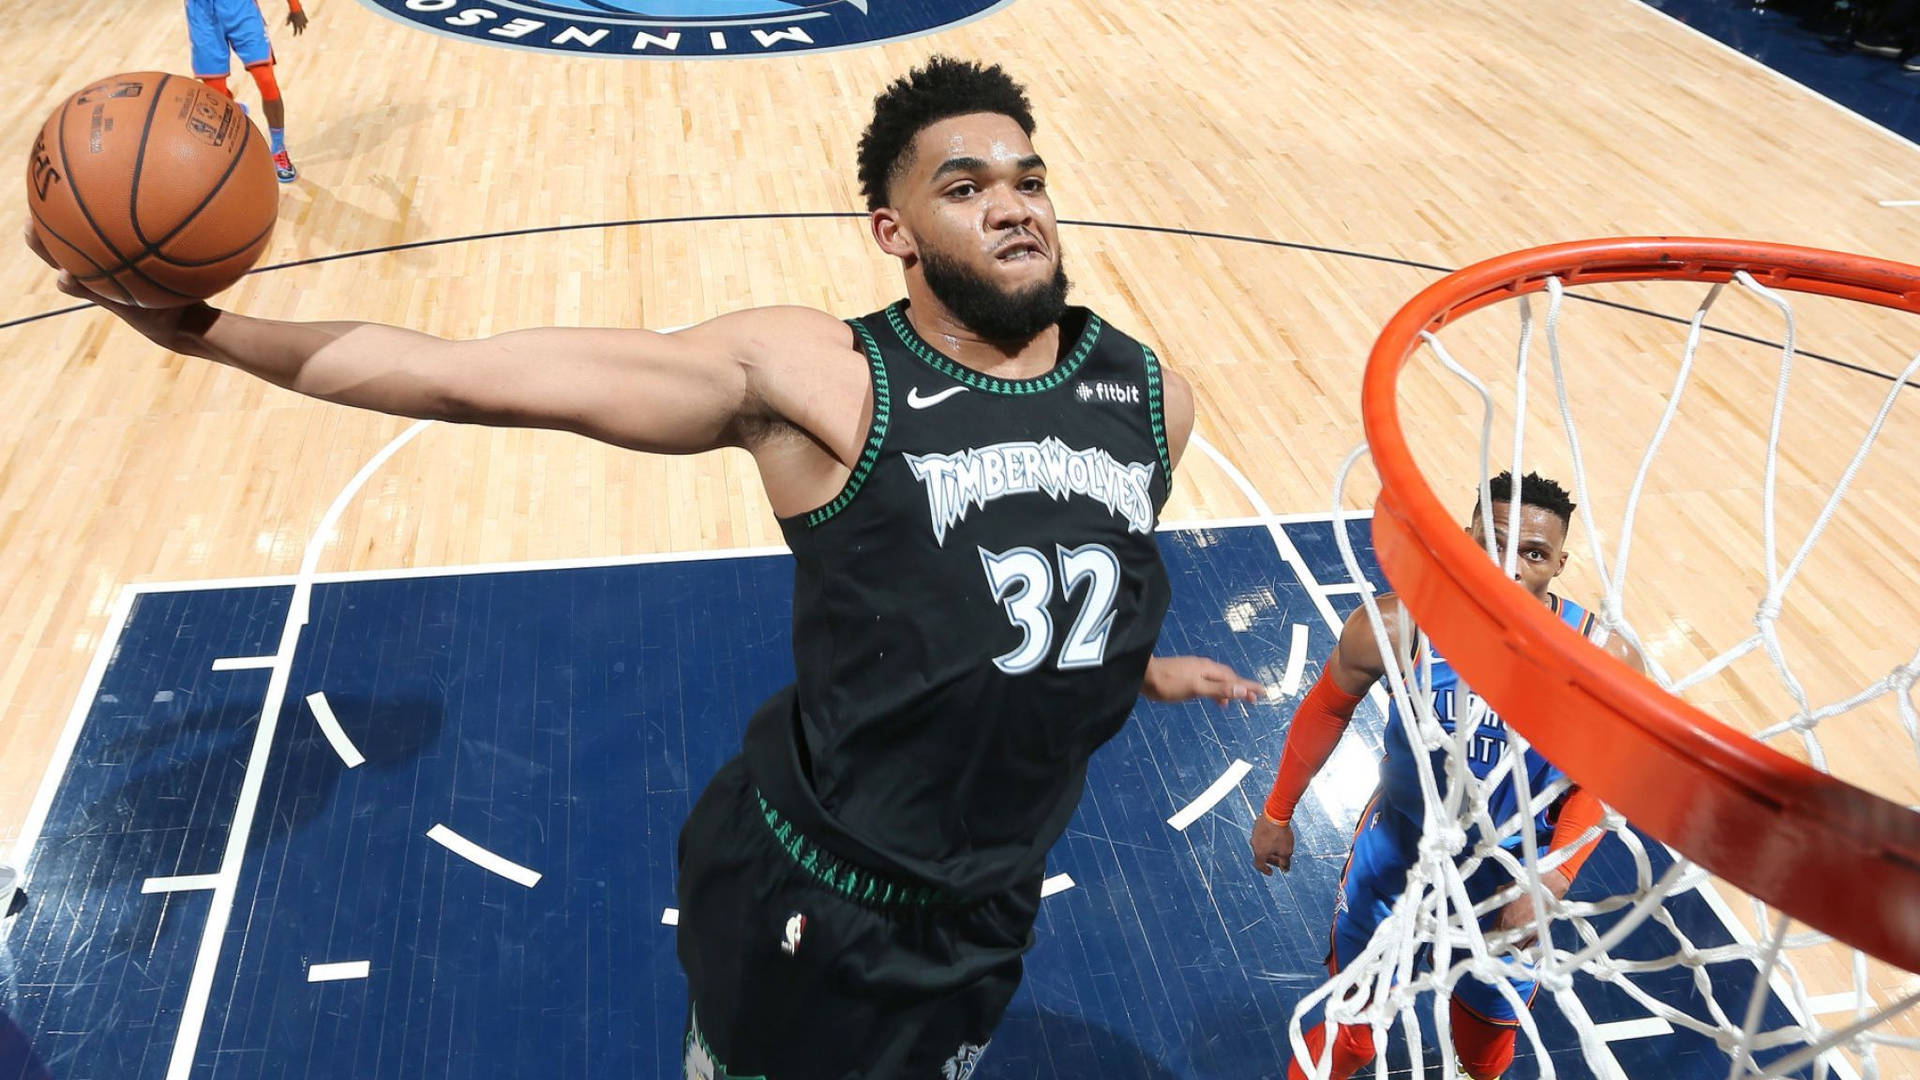 Karl-anthony Towns Mid-air Dunk Background